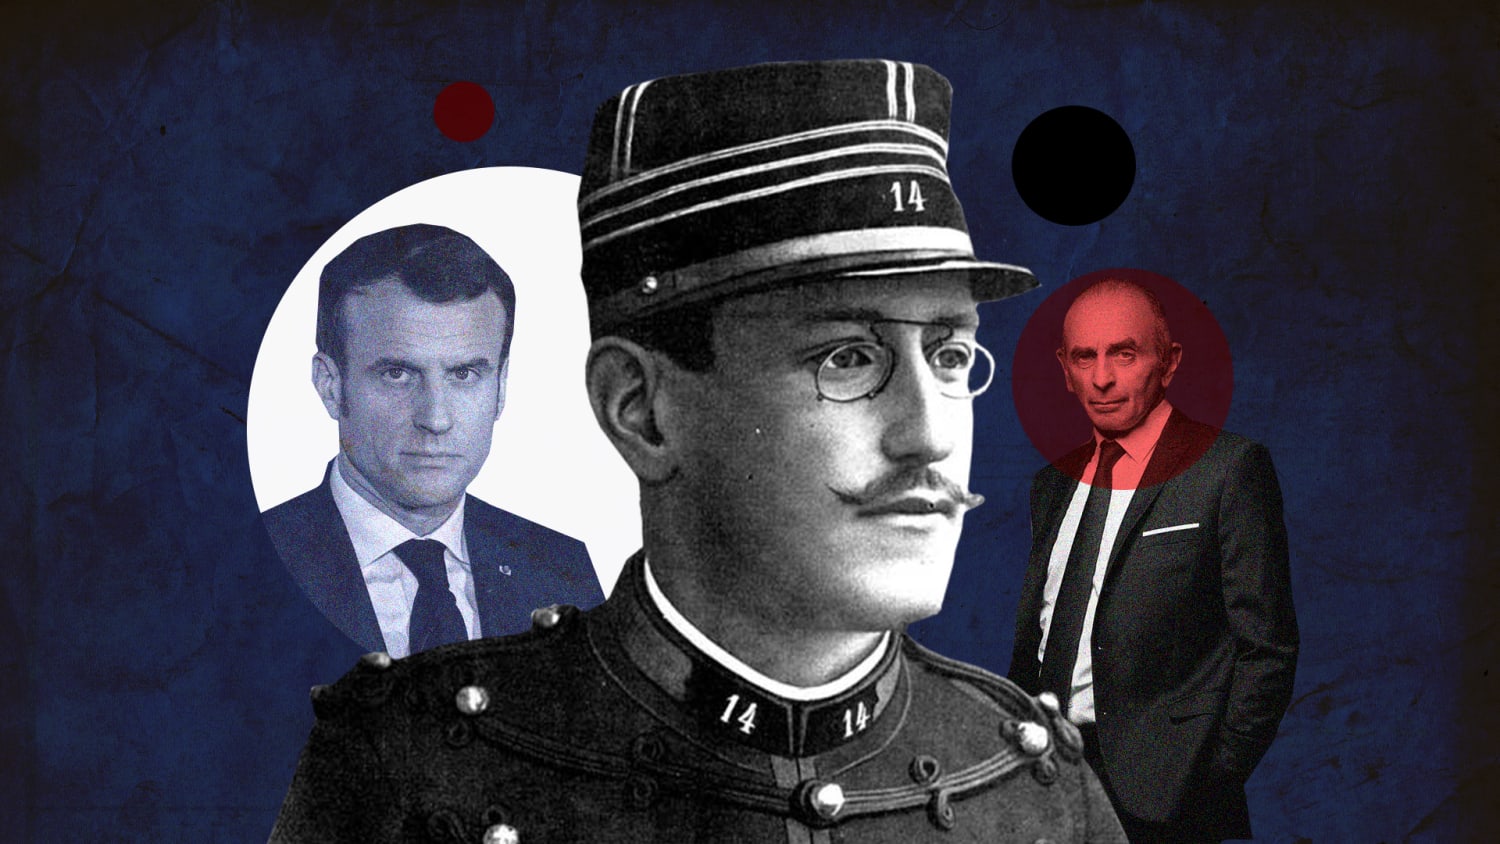 The Dreyfus affair shook France a century ago. Now the far-right is reopening old wounds.